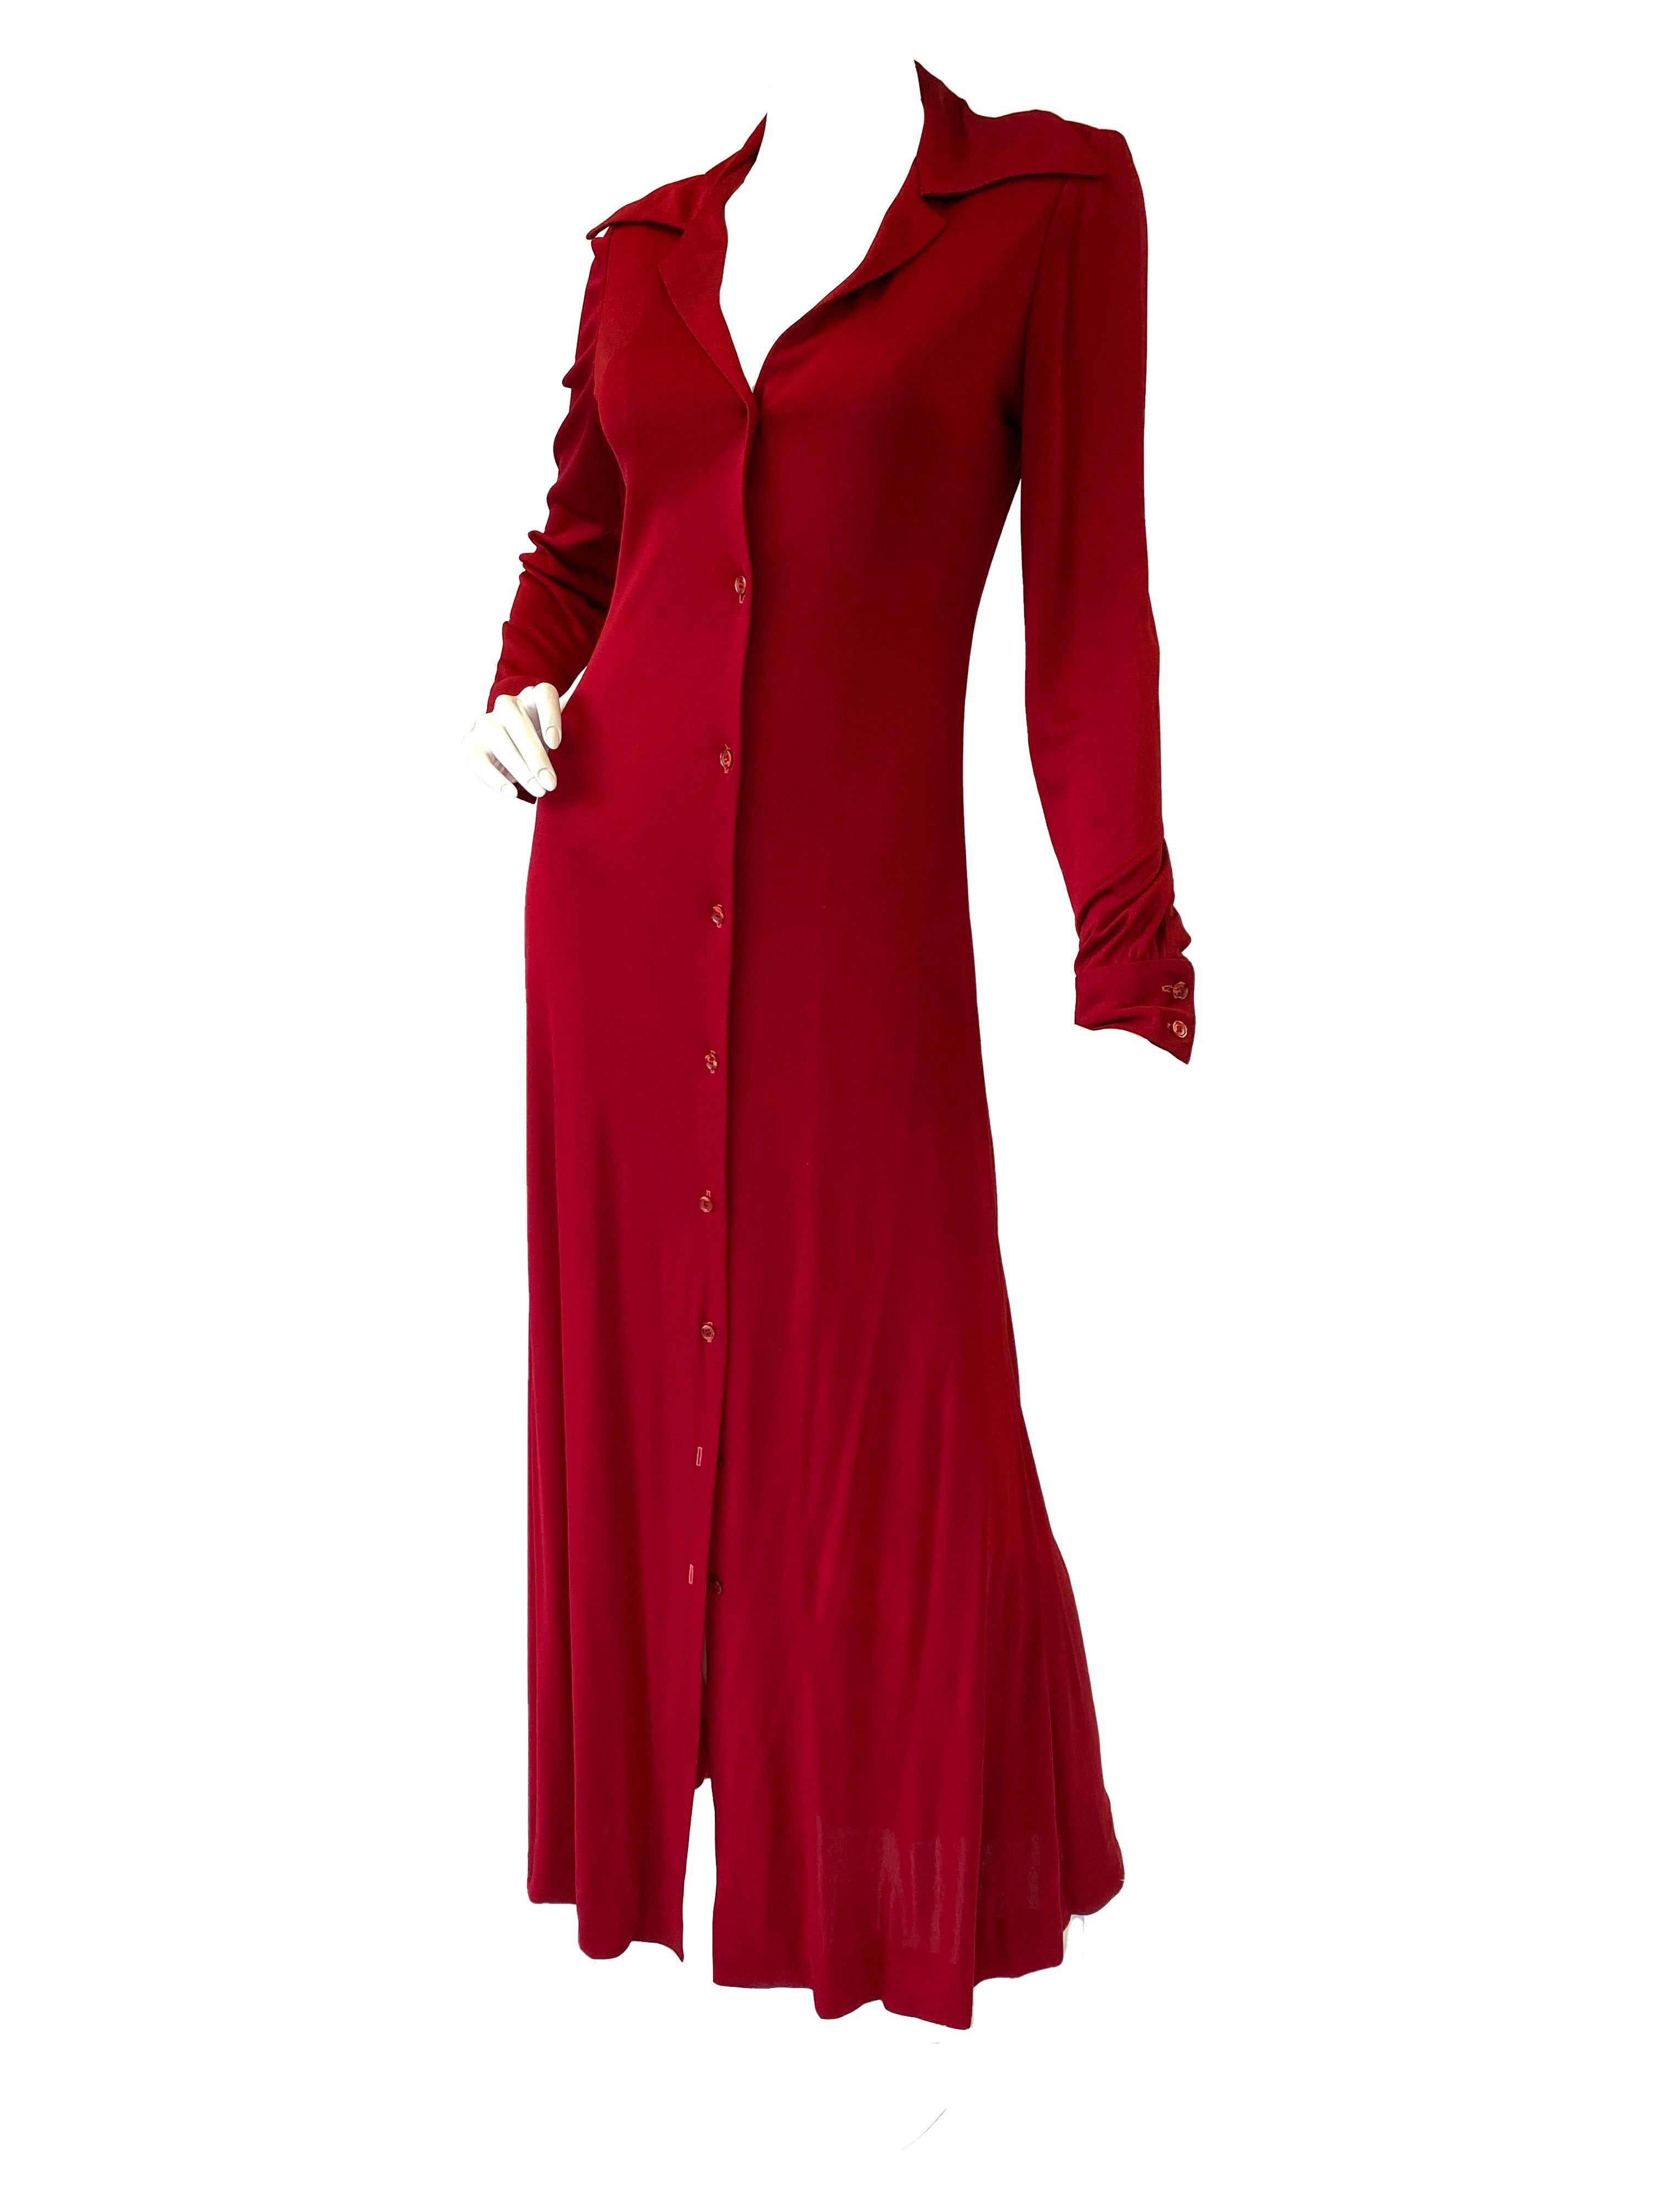 This is dress is Classic Halston.  He created clothing that is both incredibly comfortable and sensual at the same time and without ever being too revealing. Not an easy feat at all ... but he made it look so easy. 

The lightweight jersey length